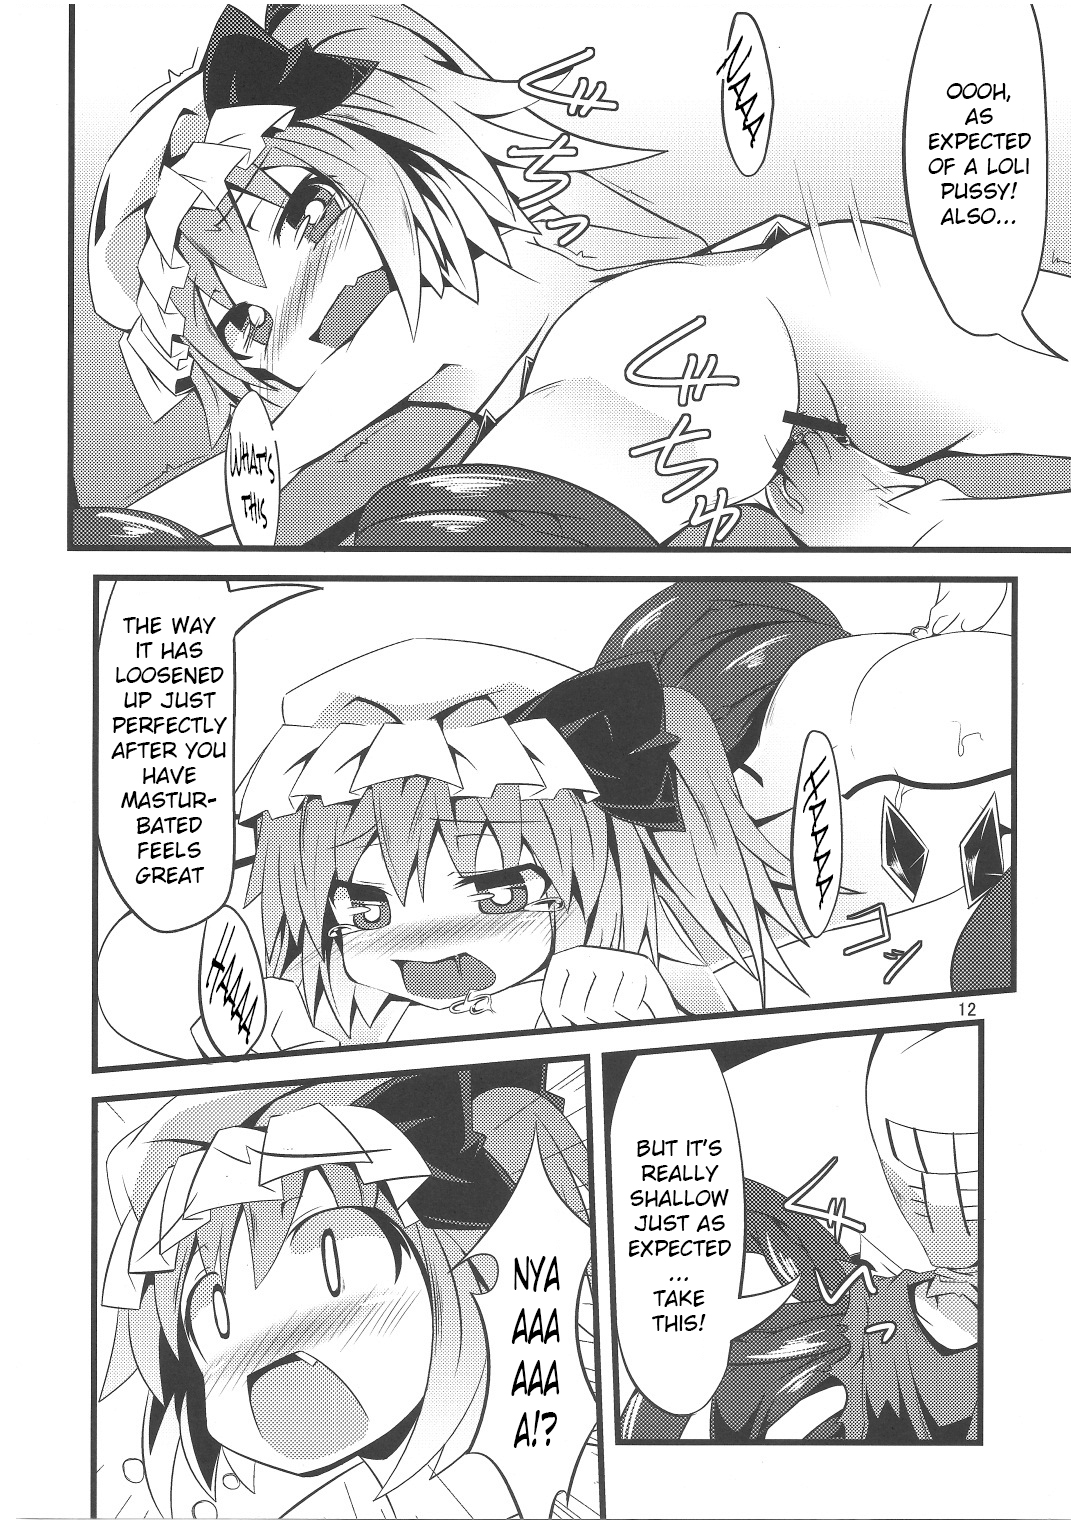 (Kouroumu 7) [Angelic Feather (Land Sale)] Tentacle Play (Touhou Project) [English] page 11 full